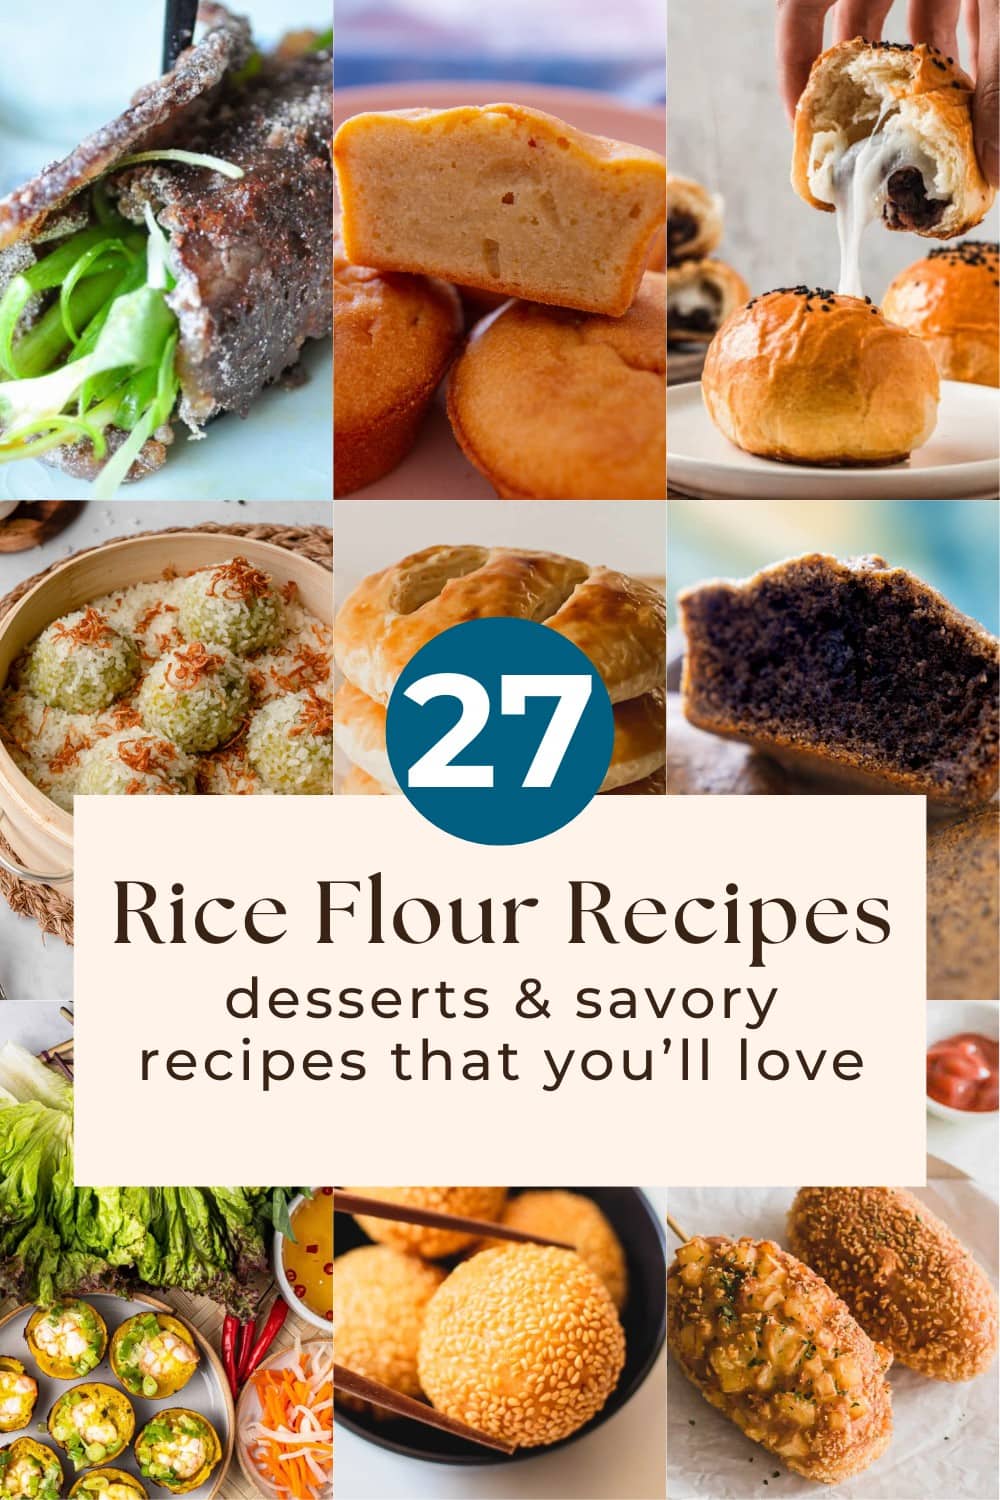 A collage of 9 photos of savory and dessert rice flour rices and text, "27 Rice Flour Recipes – desserts and savory recipes that you'll love."